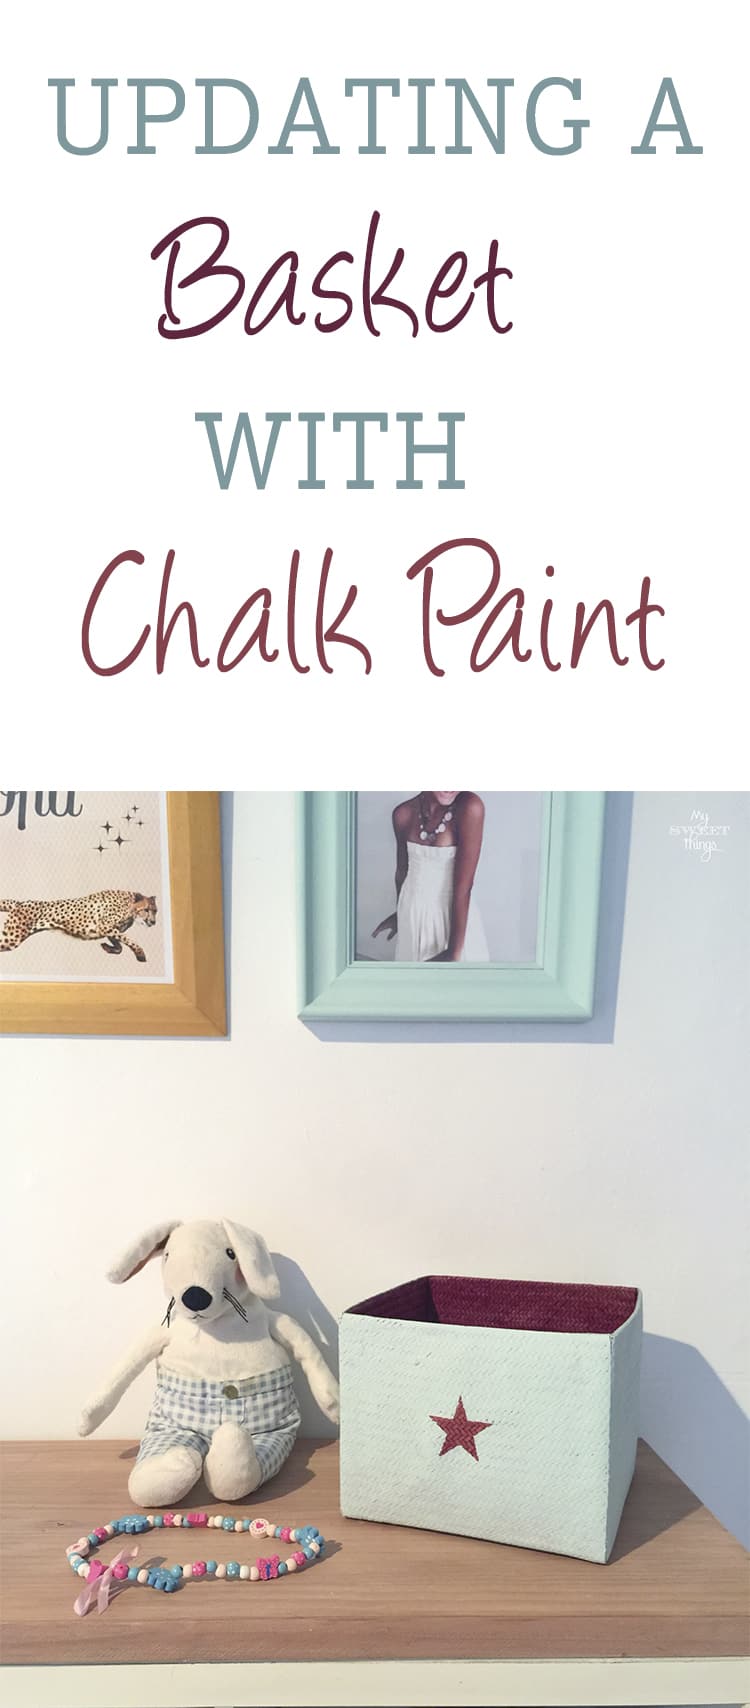 Updating a basket with chalk paint can be done easily and in less than 30 minutes and you end up with a beautiful piece of home decor  ·  Via www.sweethings.net